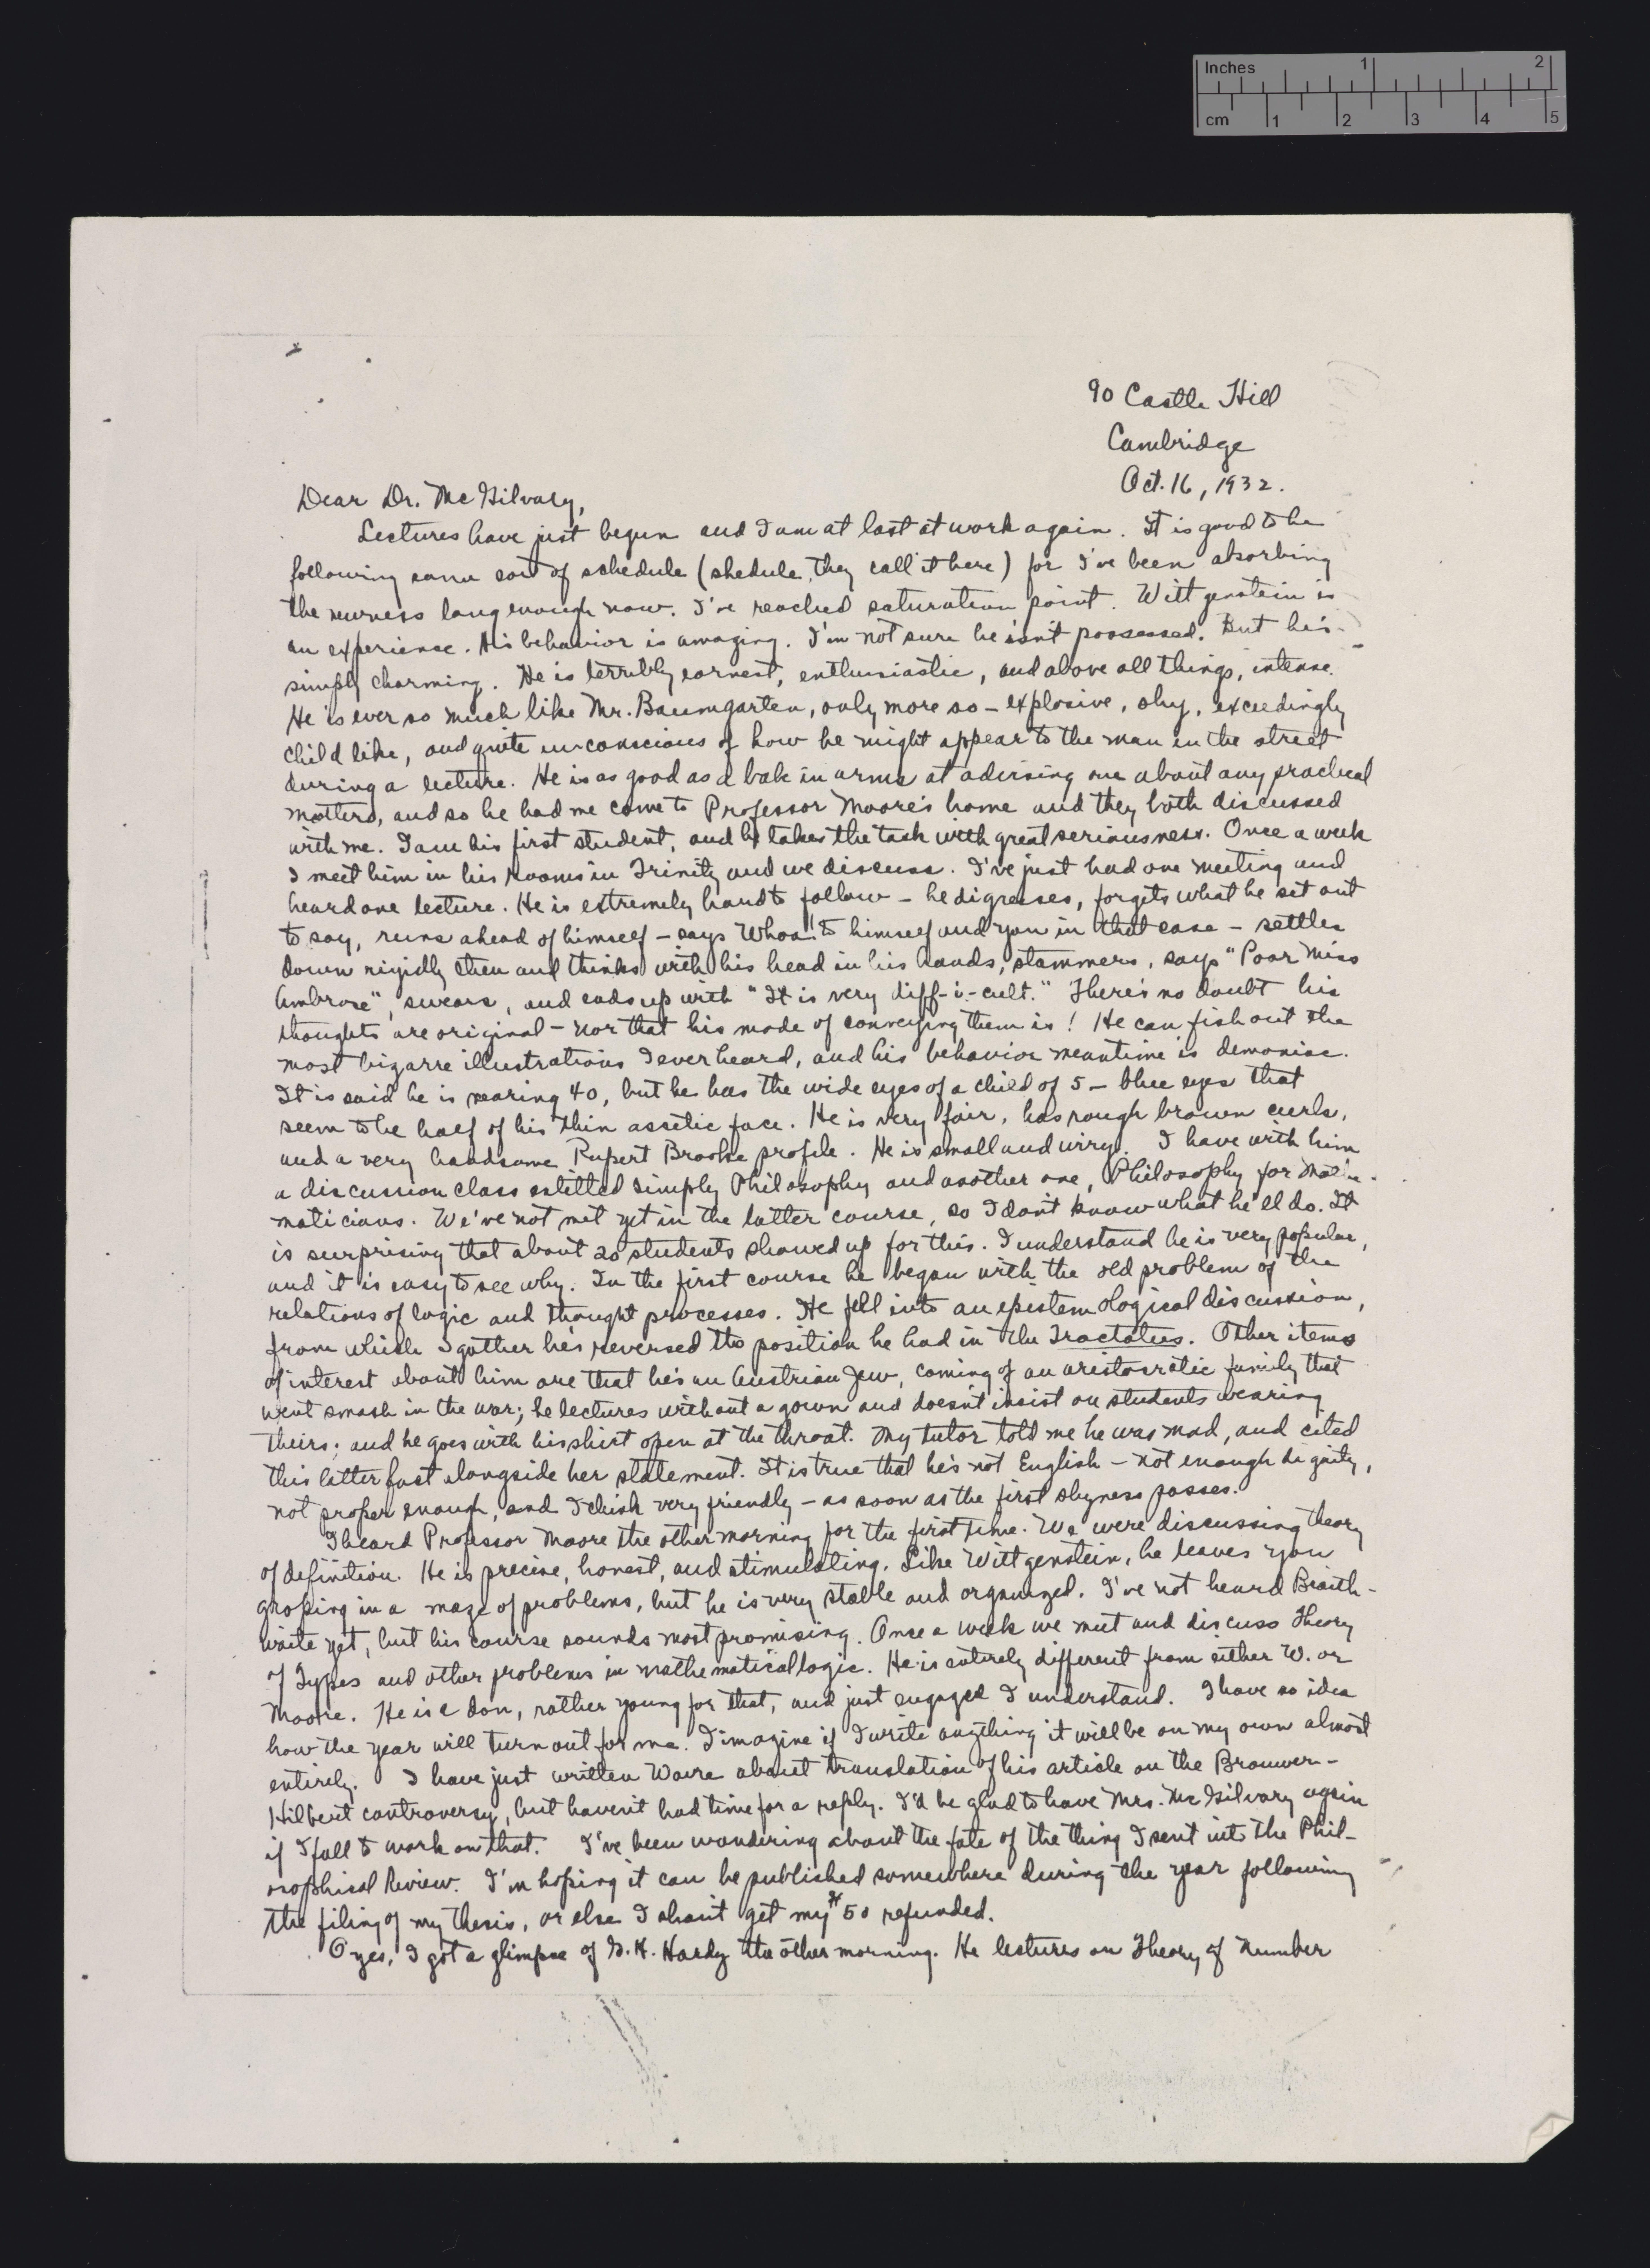 Letter from Ambrose to McGilvary, MS Add.9938 Box 2, Folio 2, Cambridge University Library. By permission of the Syndics of Cambridge University Library.